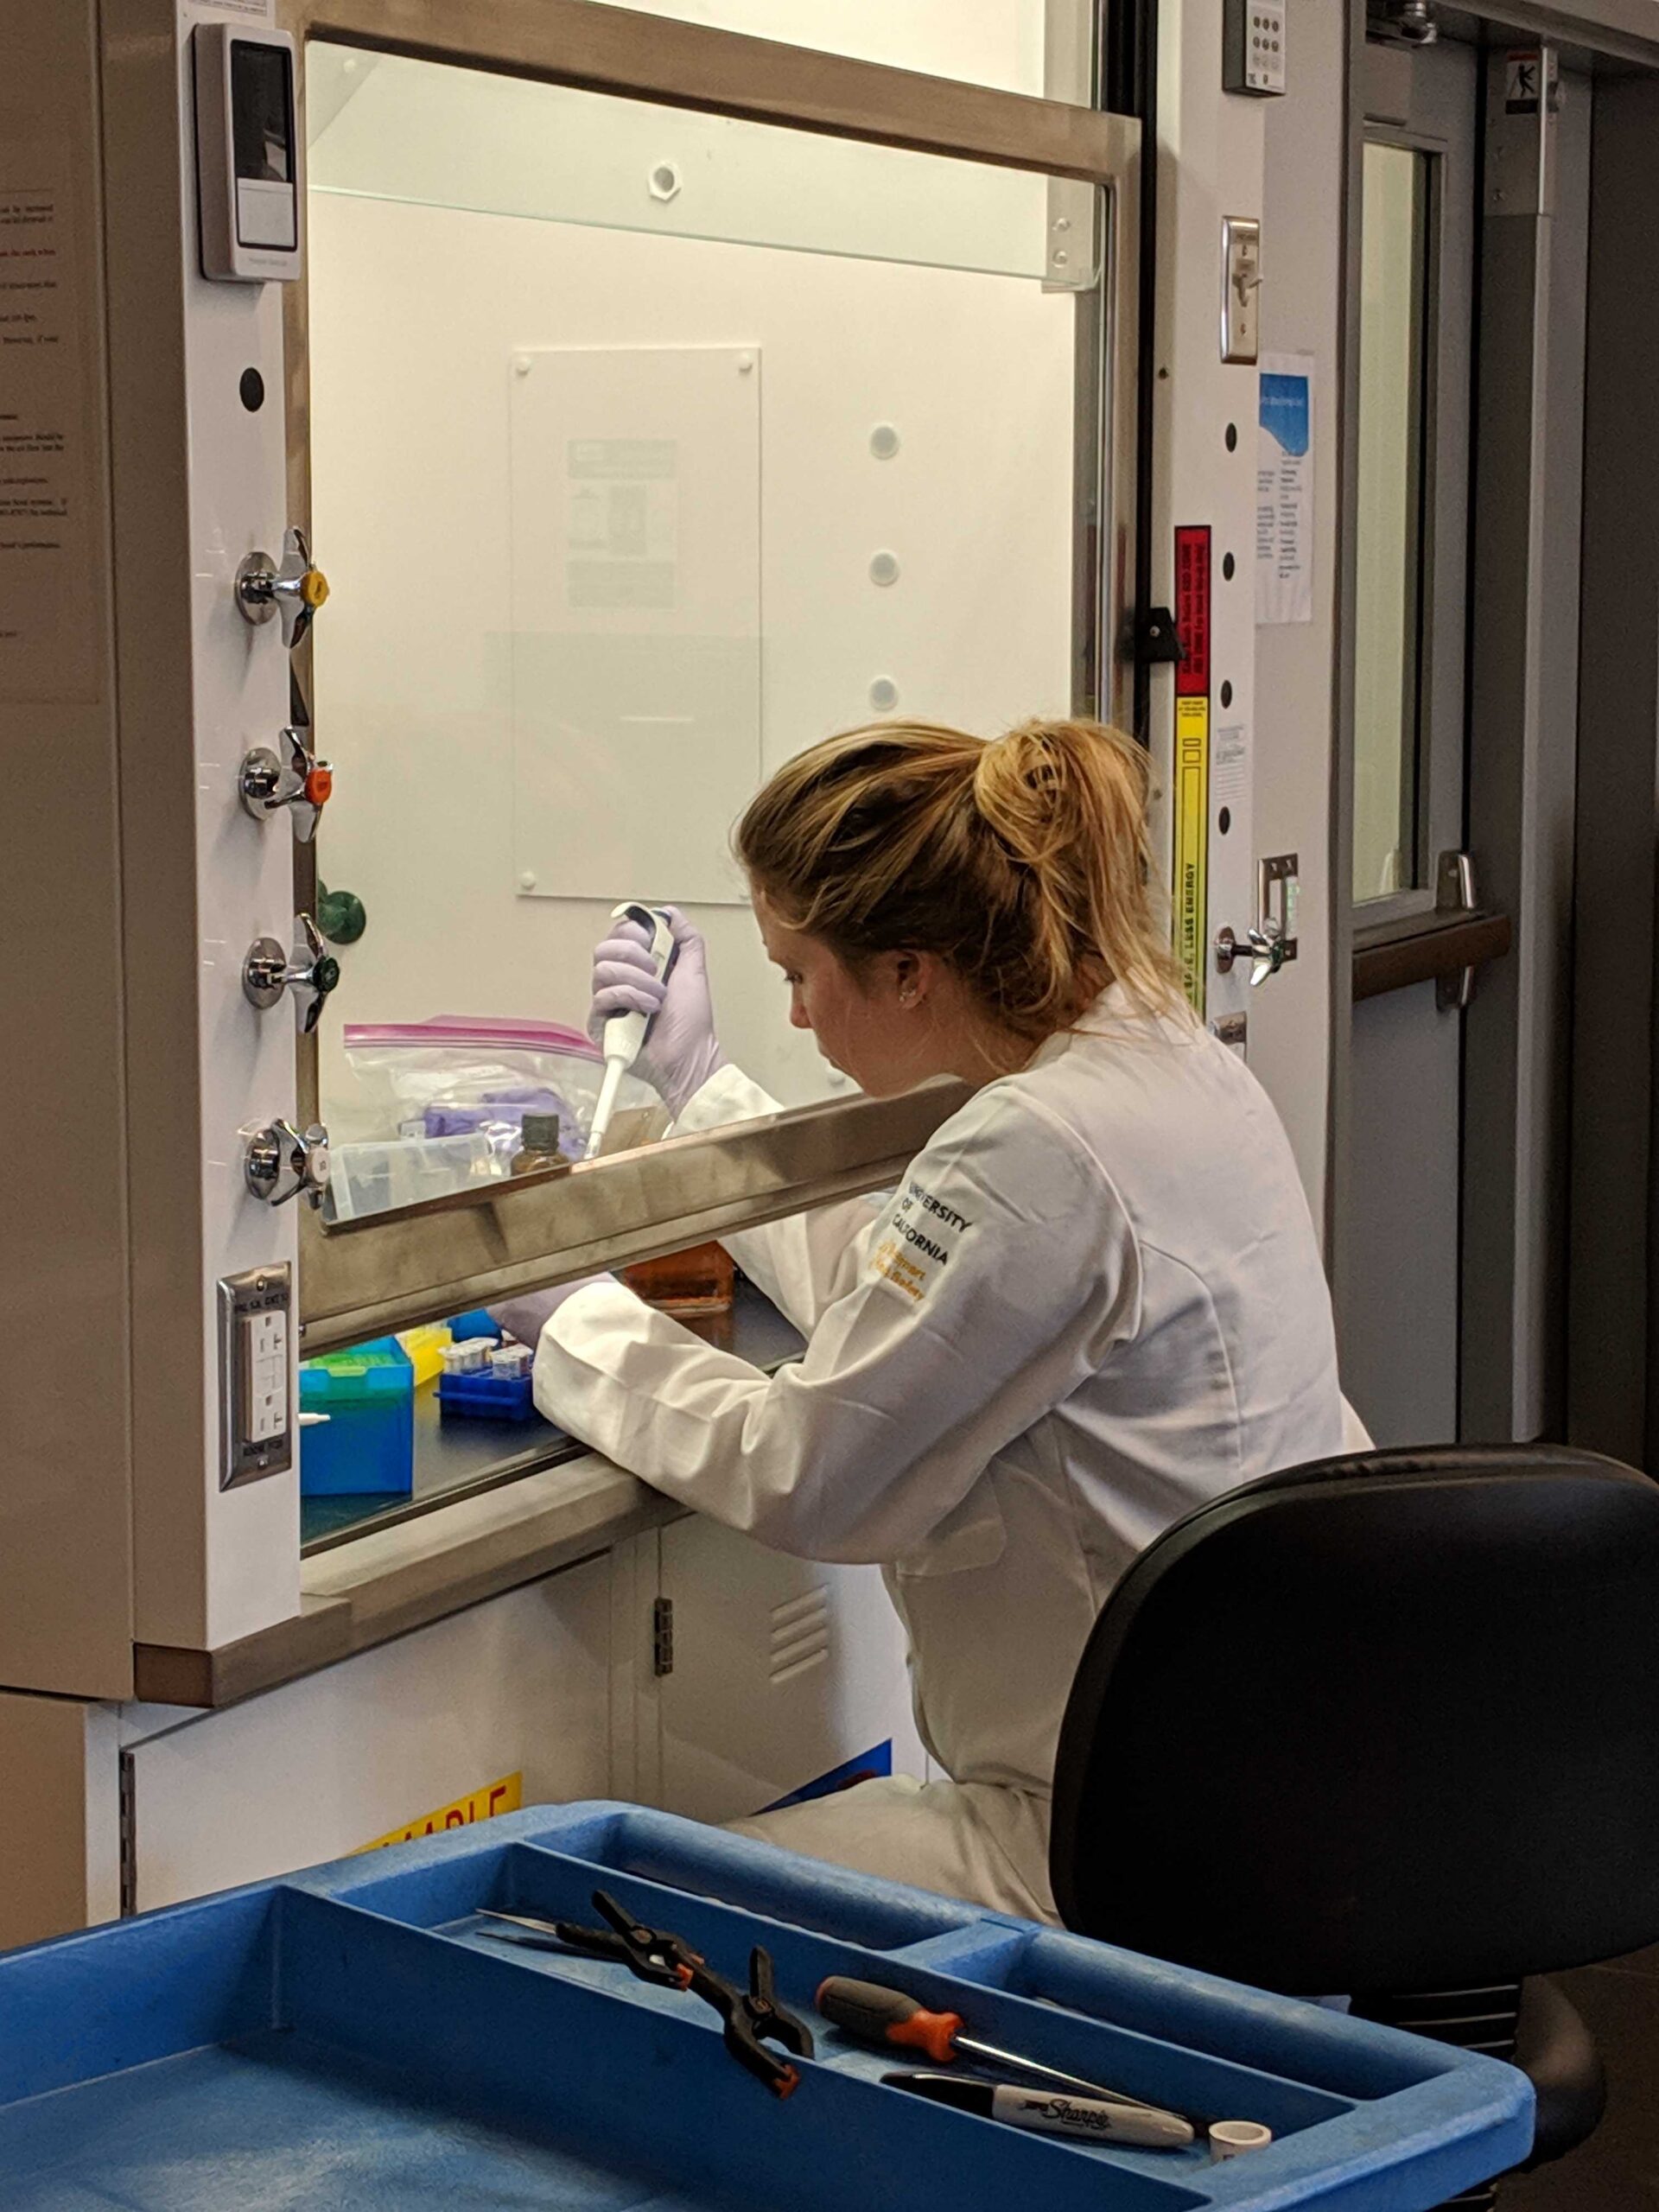 Person pipetting at a fume hood.